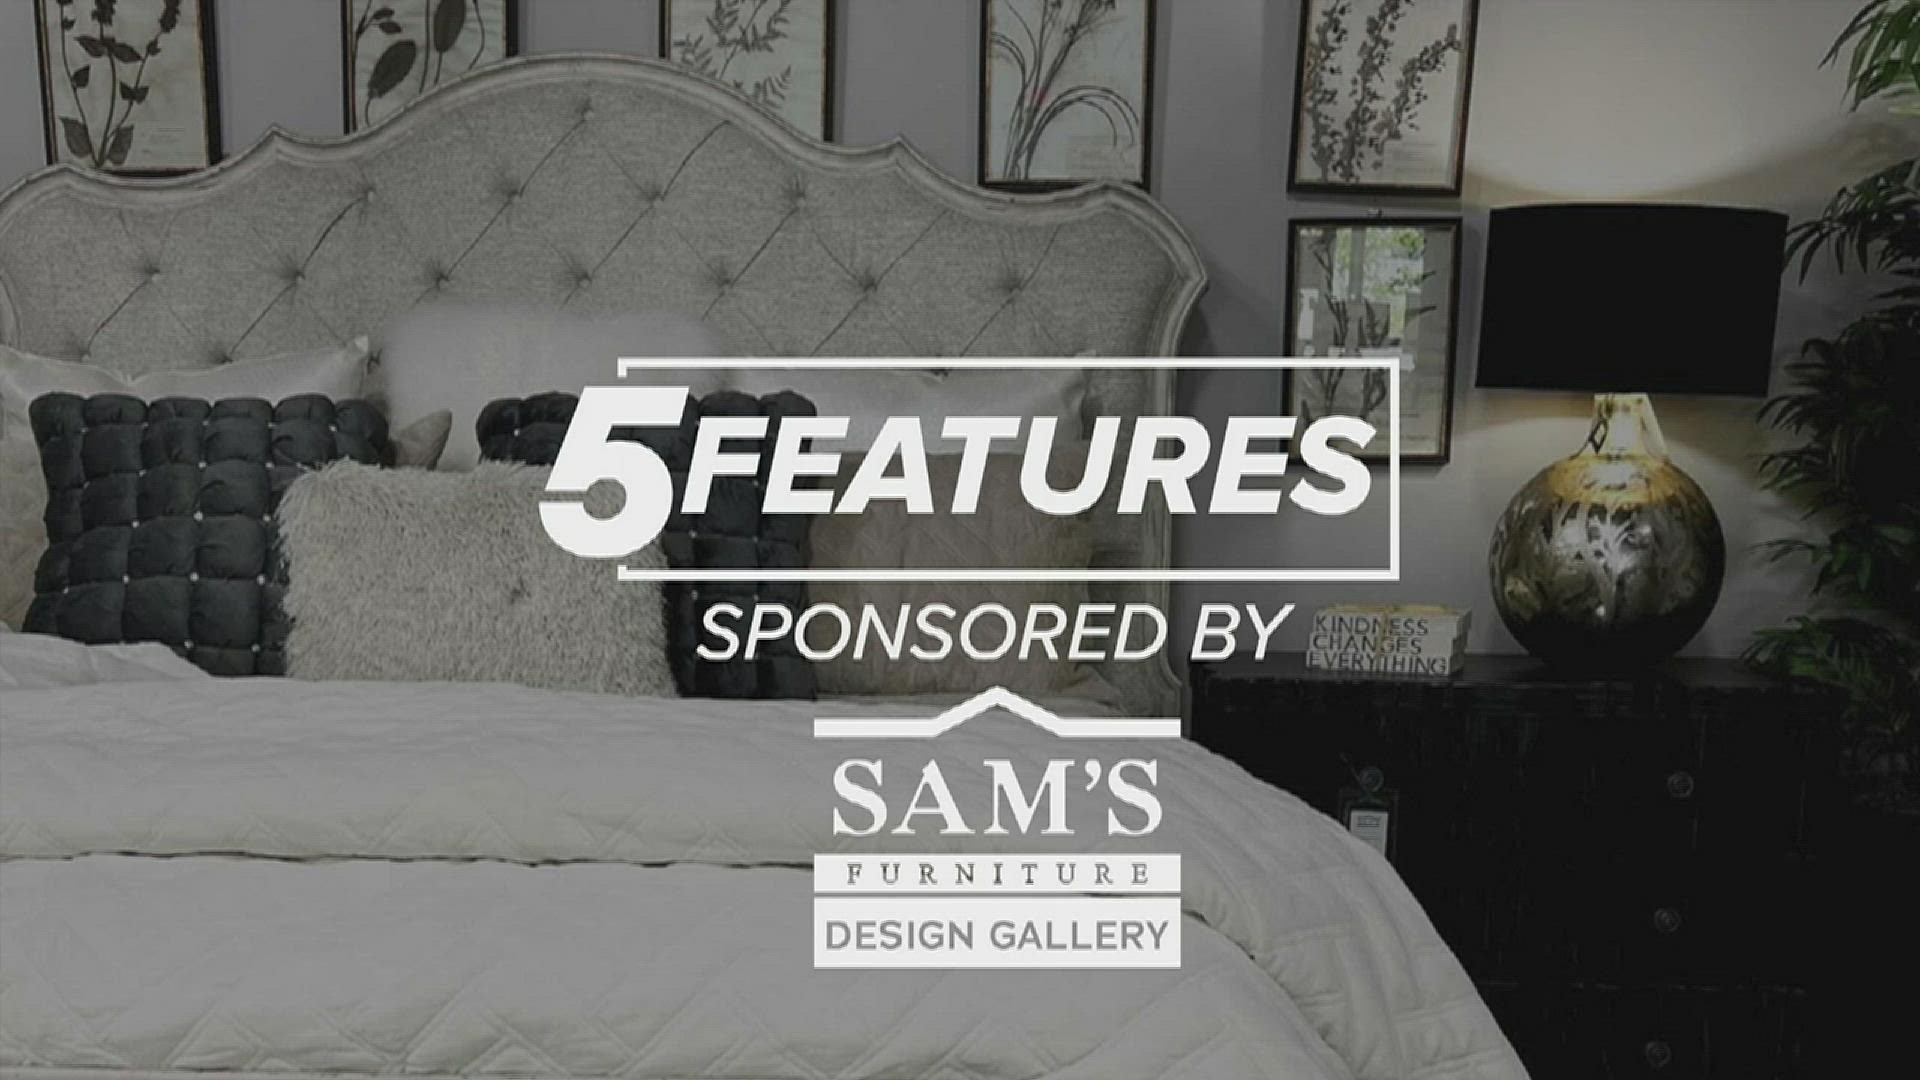 Sponsored by: Design Gallery by Sam's Furniture